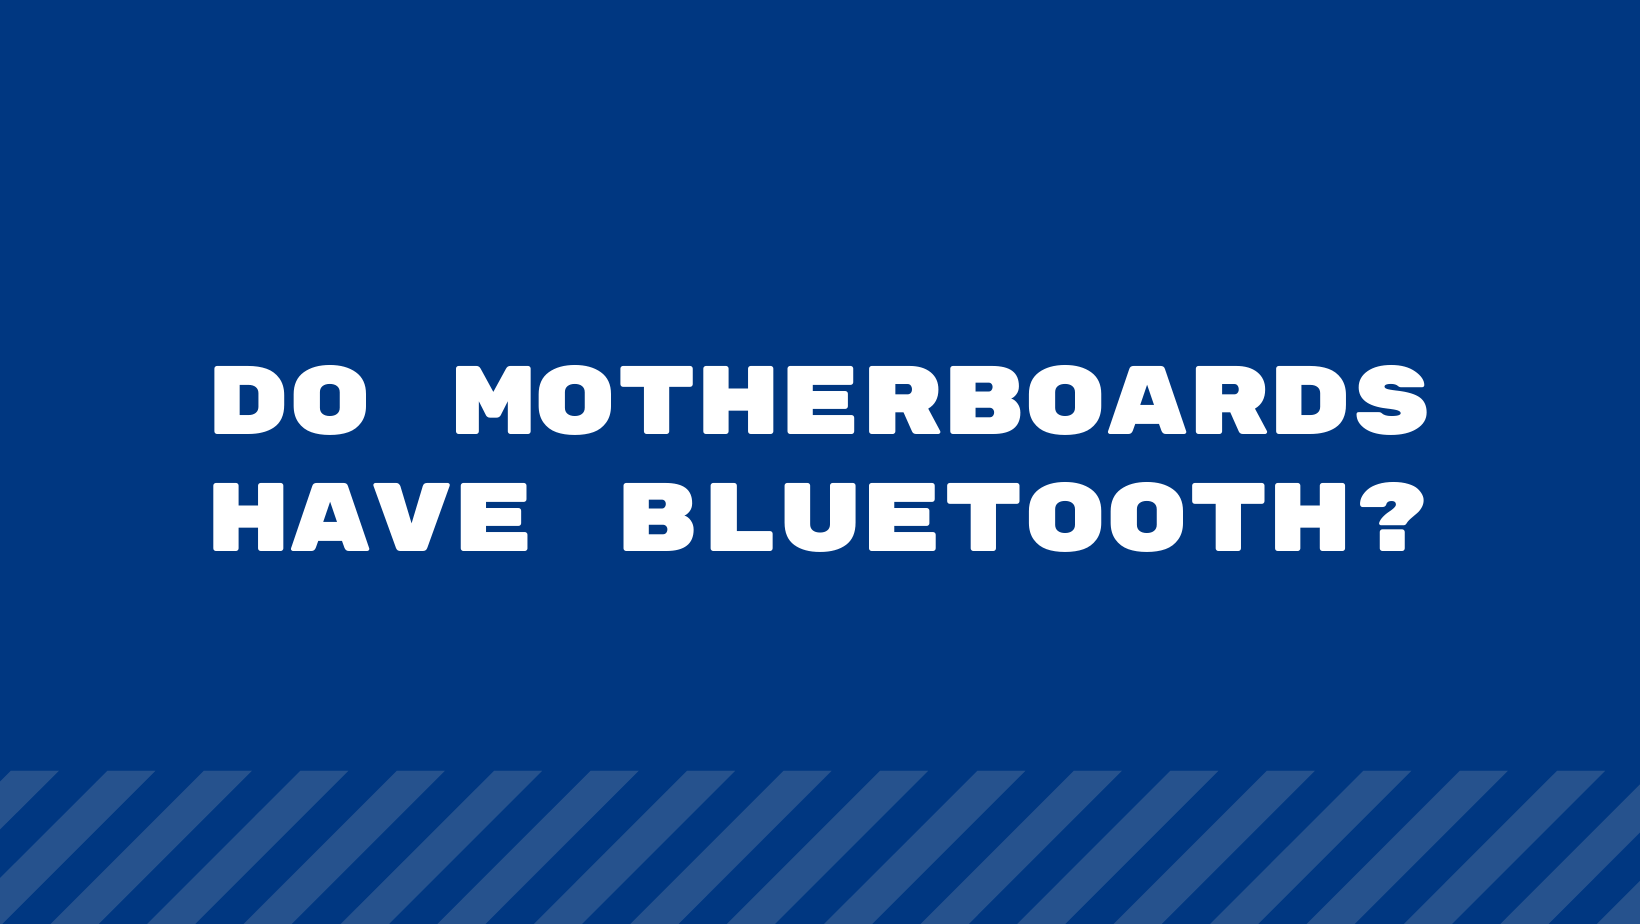 Do Motherboards have Bluetooth